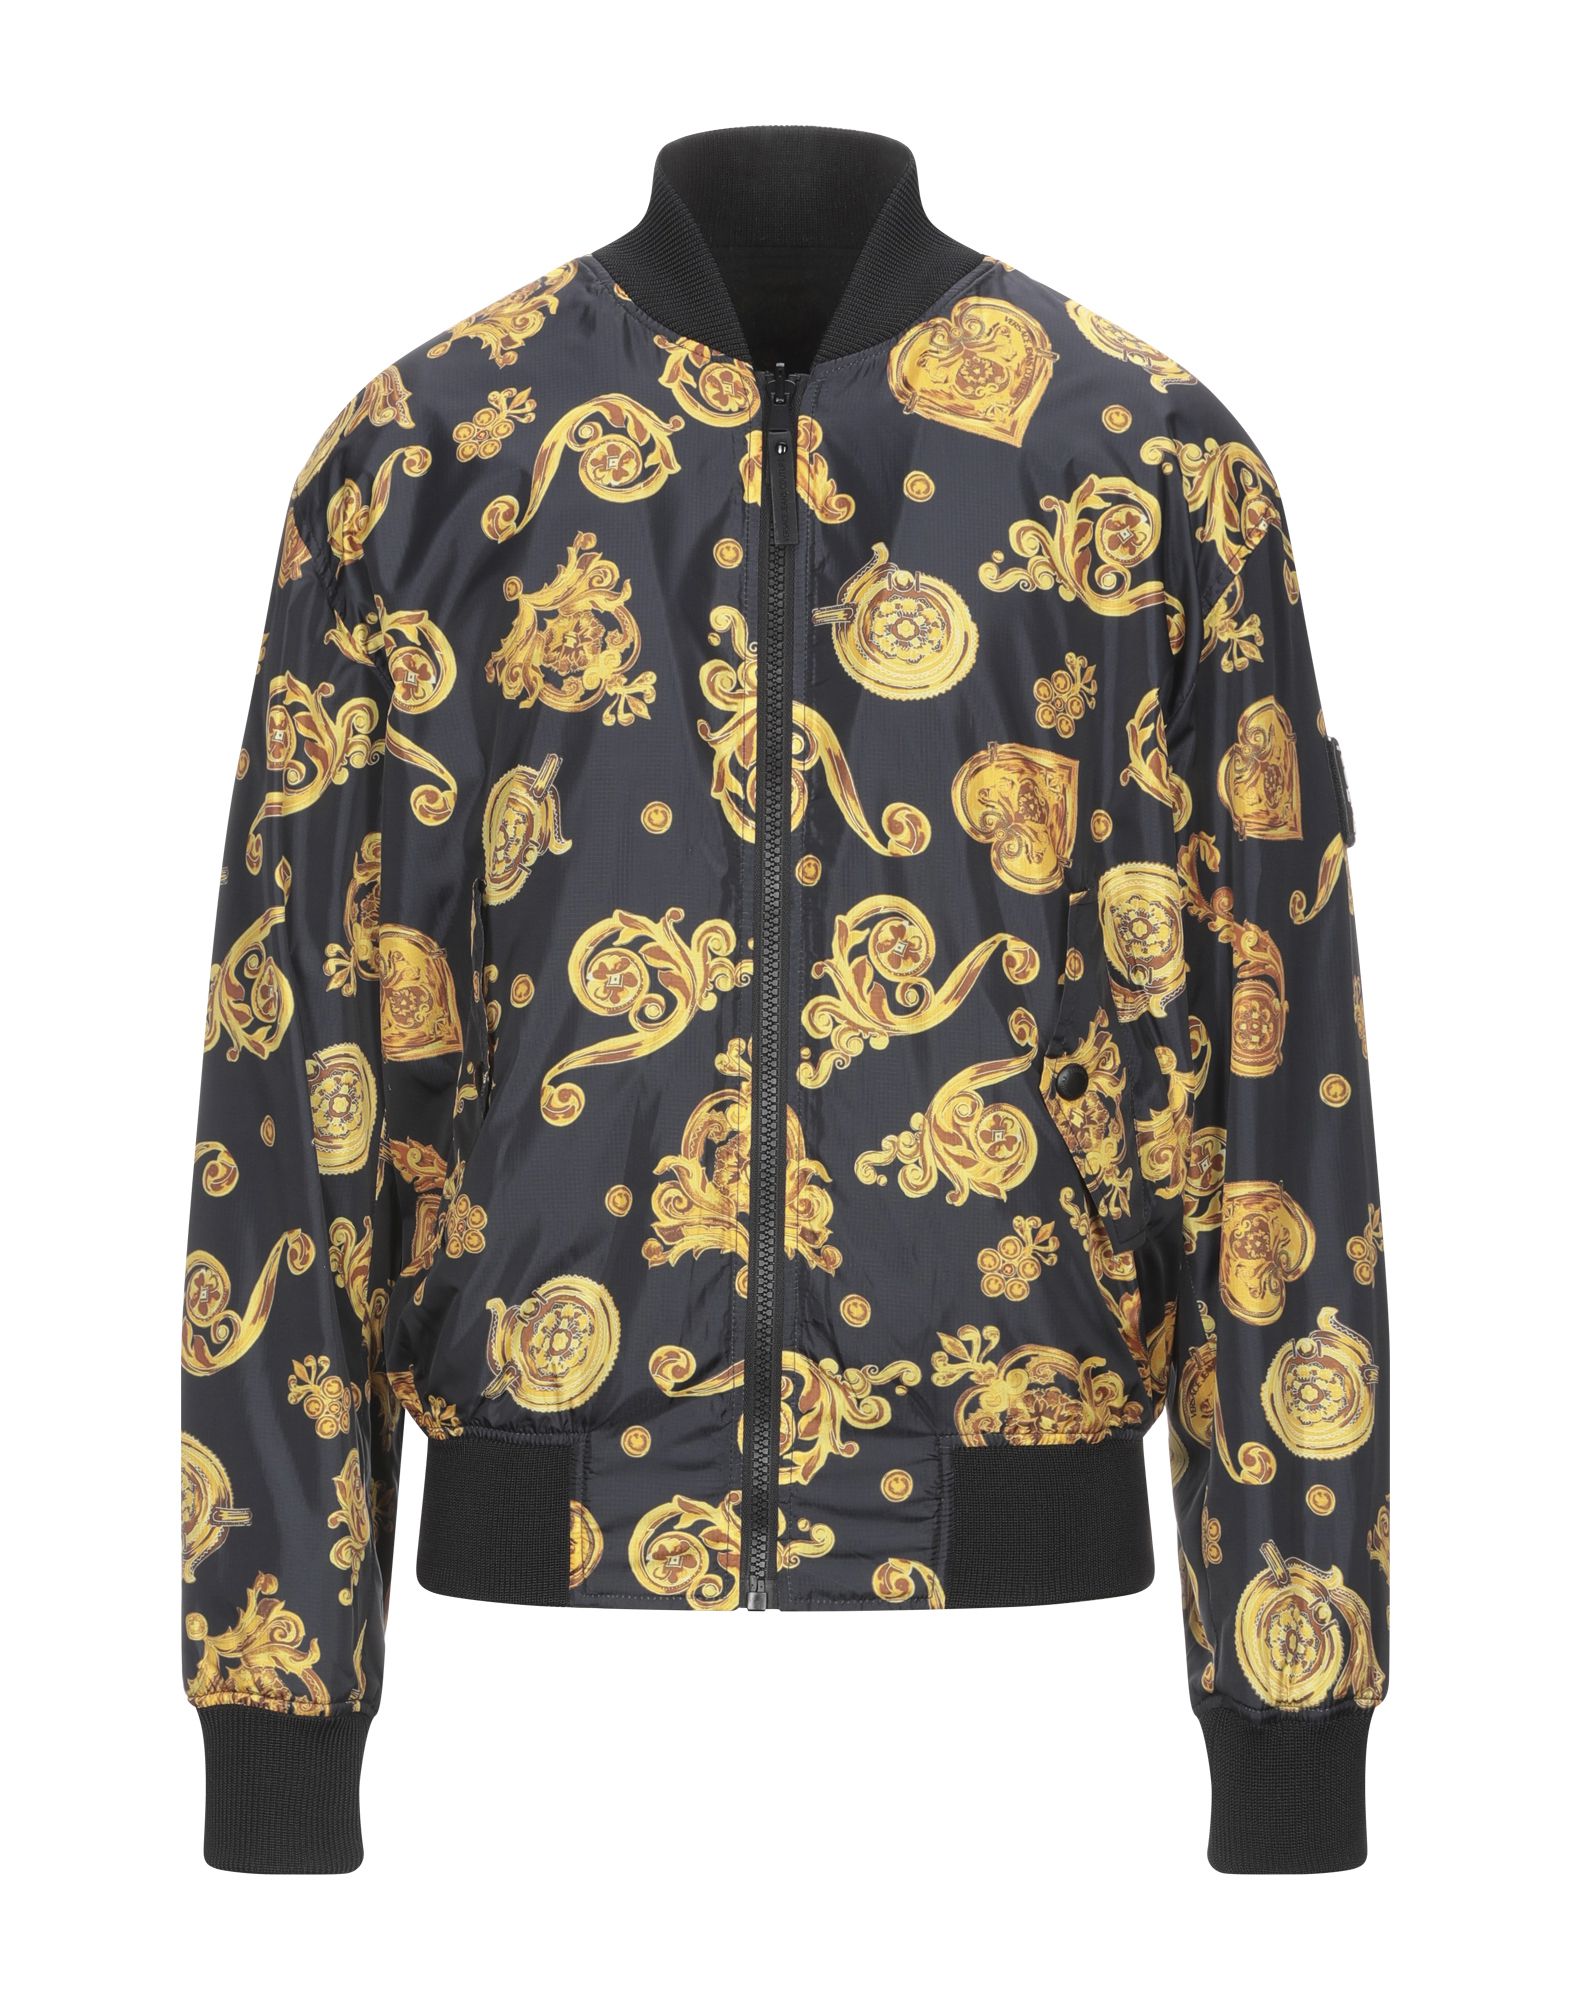 VERSACE JEANS COUTURE Jackets - Item 41994835